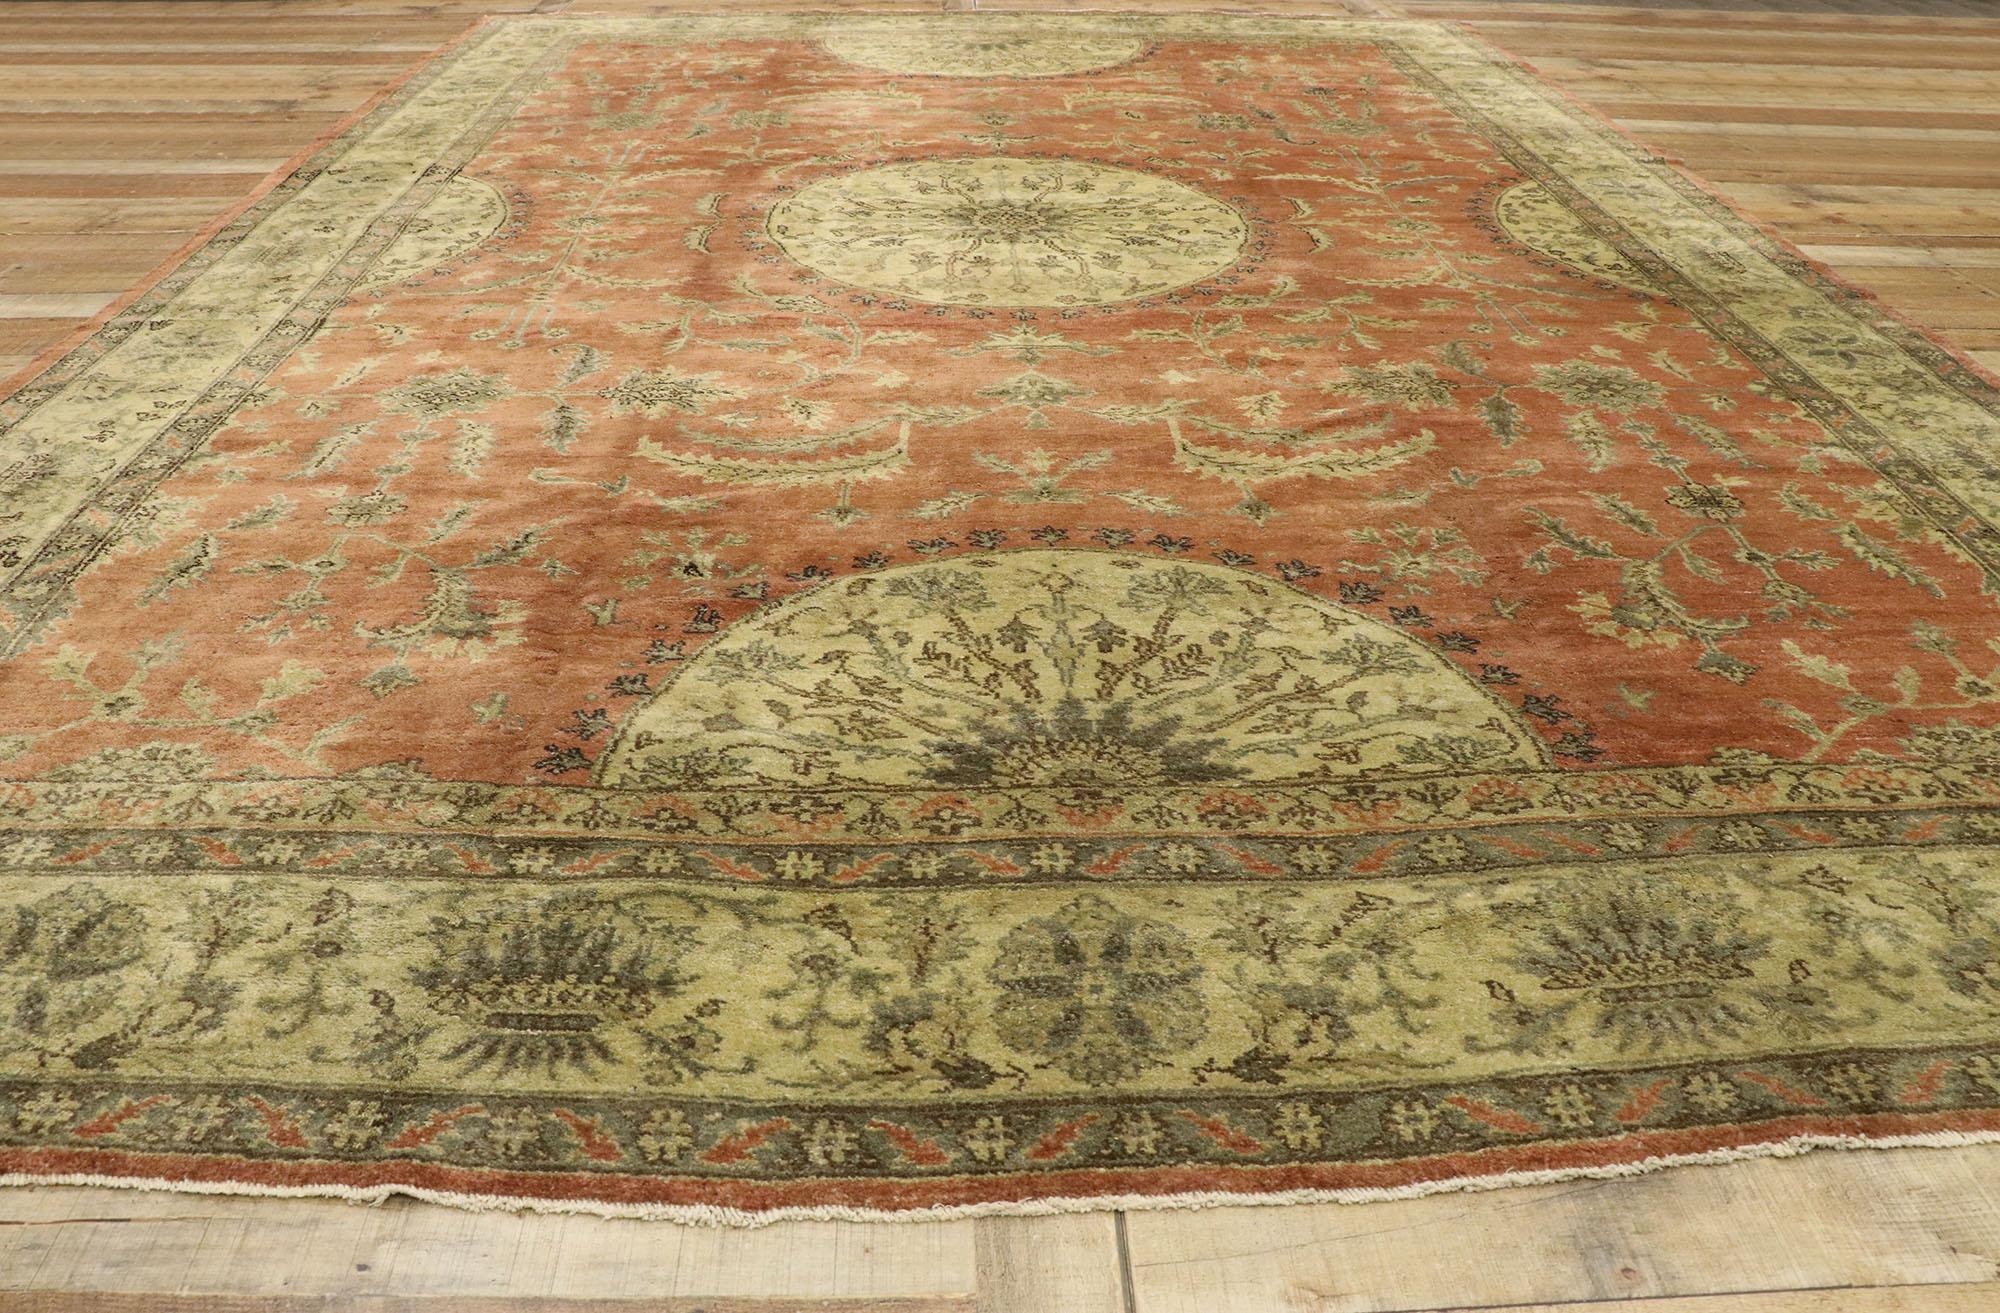 Distressed Vintage Turkish Oushak Rug with Rustic English Manor Style For Sale 1